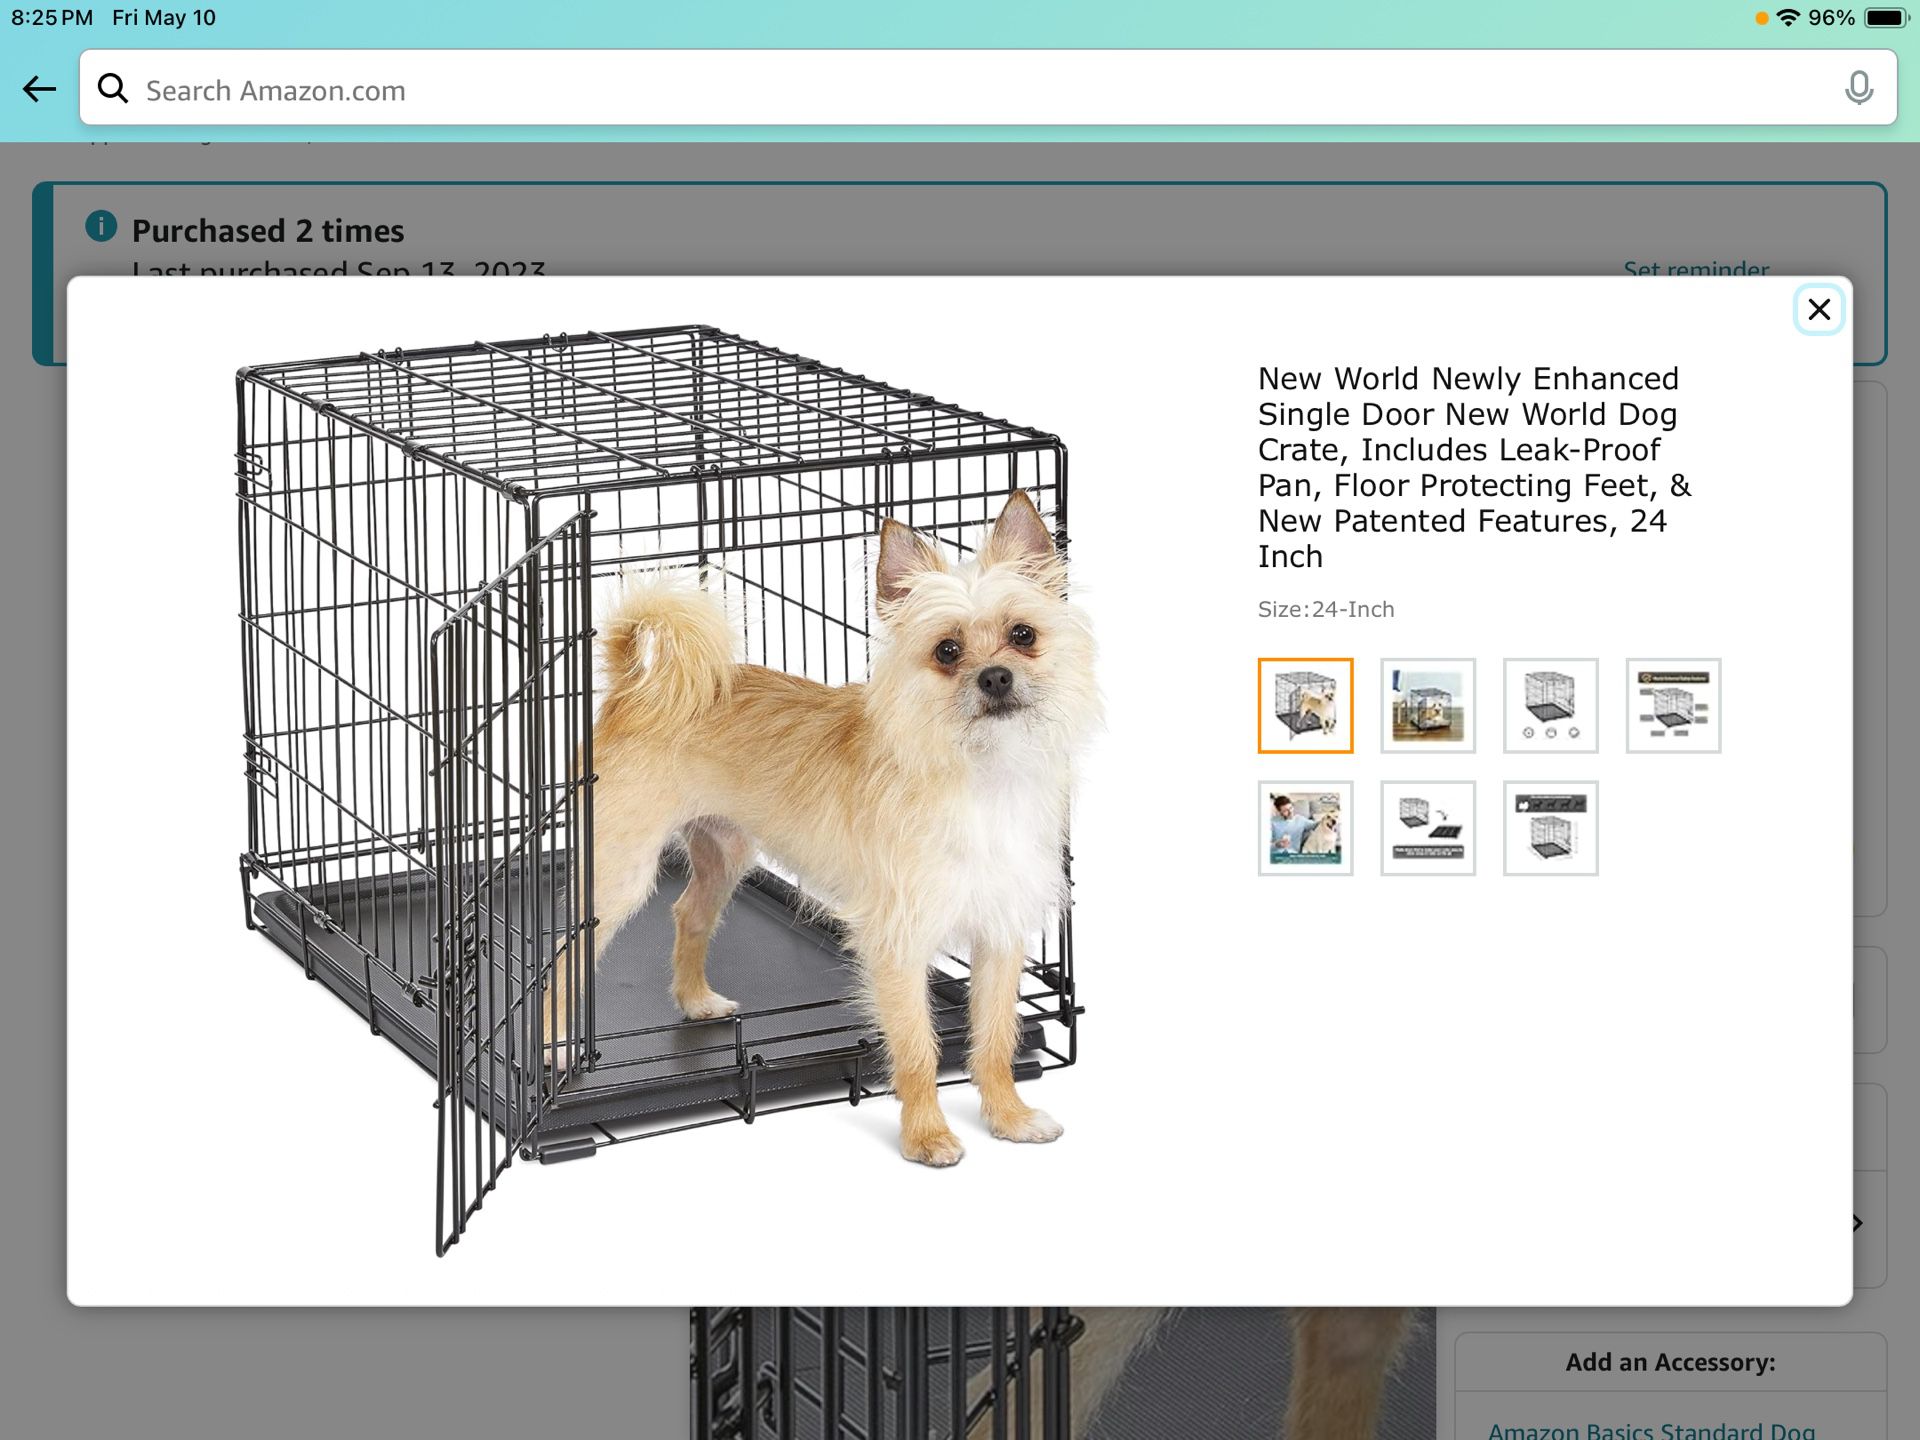 24” Dog Crate With Pan (2)